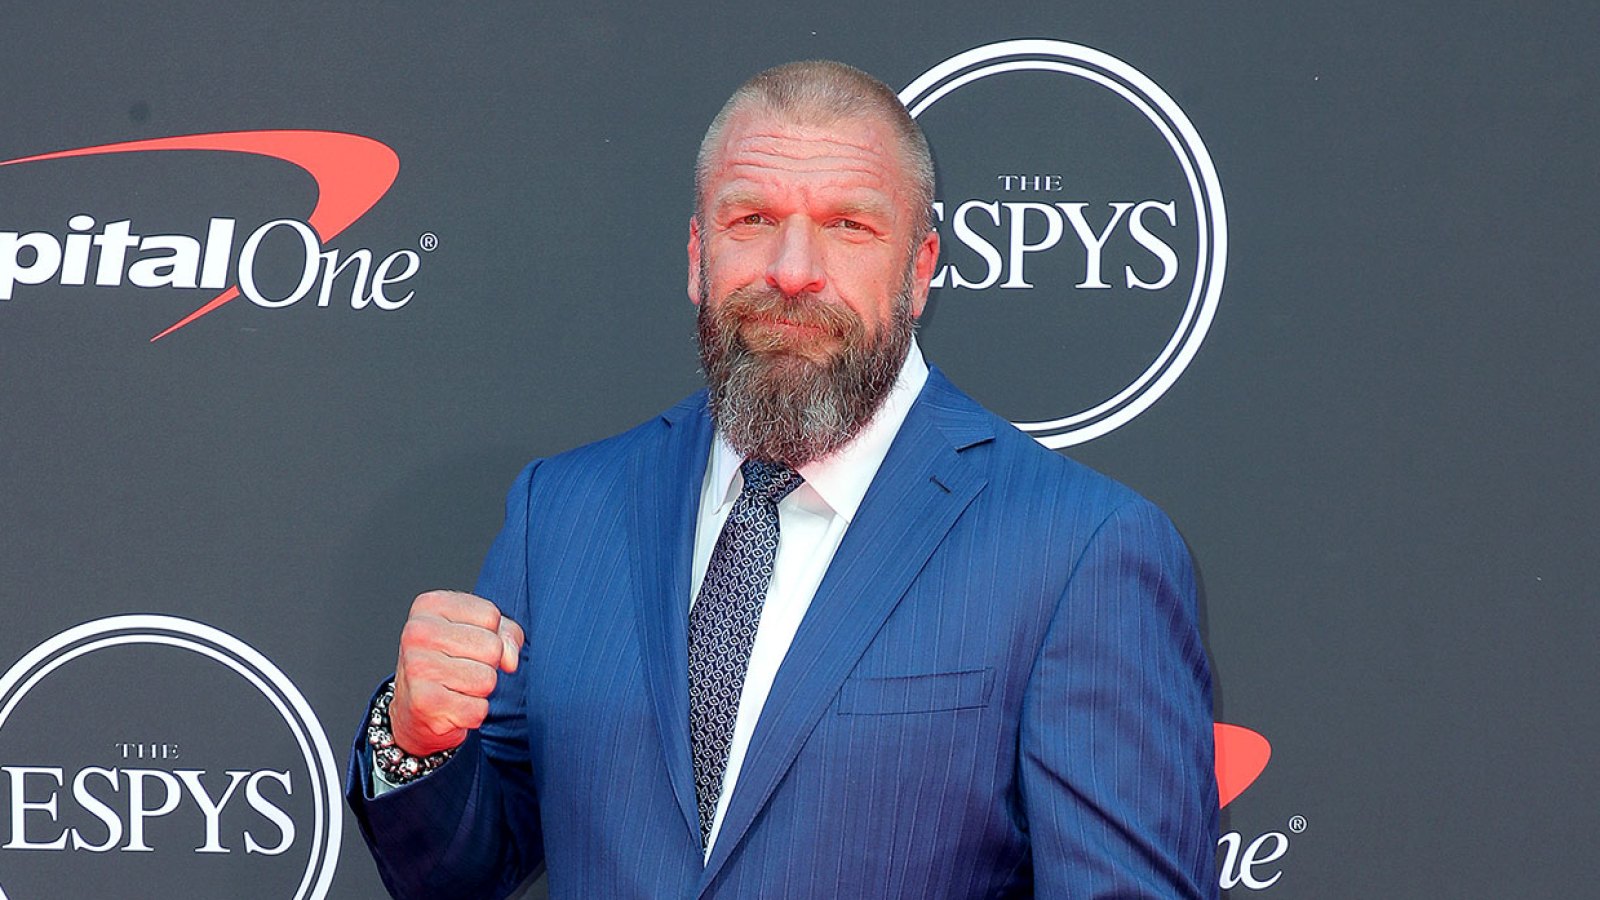 https://www.usmagazine.com/wp-content/uploads/2022/03/WWE-Star-Paul-Triple-H-Levesque-Says-He-Will-Never-Wrestle-Again-After-Suffering-Heart-Failure-and-Undergoing-Surgery-Retire.jpg?crop=94px%2C0px%2C1239px%2C700px&resize=1600%2C900&quality=86&strip=all